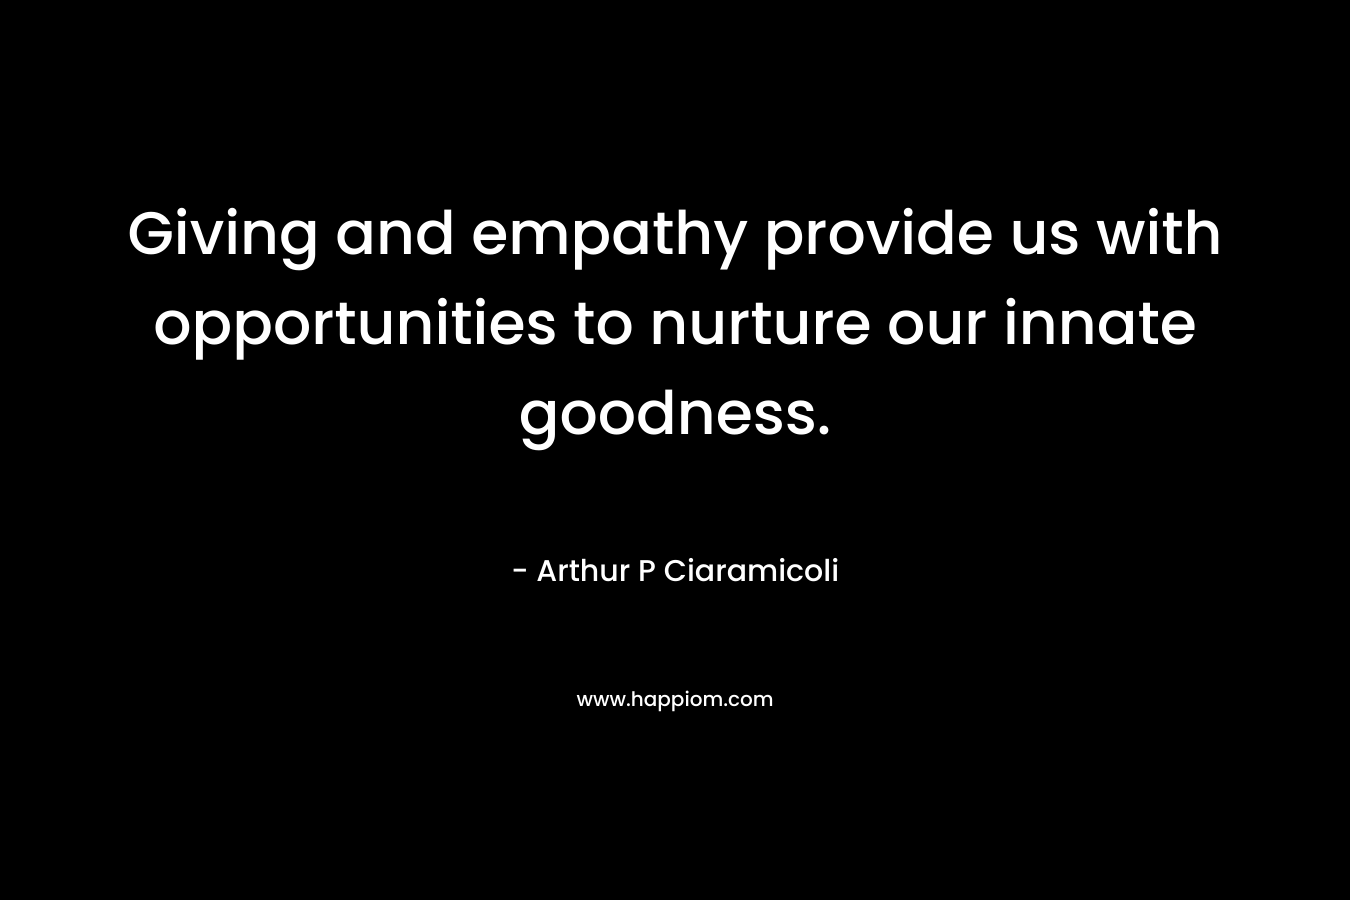 Giving and empathy provide us with opportunities to nurture our innate goodness. – Arthur P Ciaramicoli